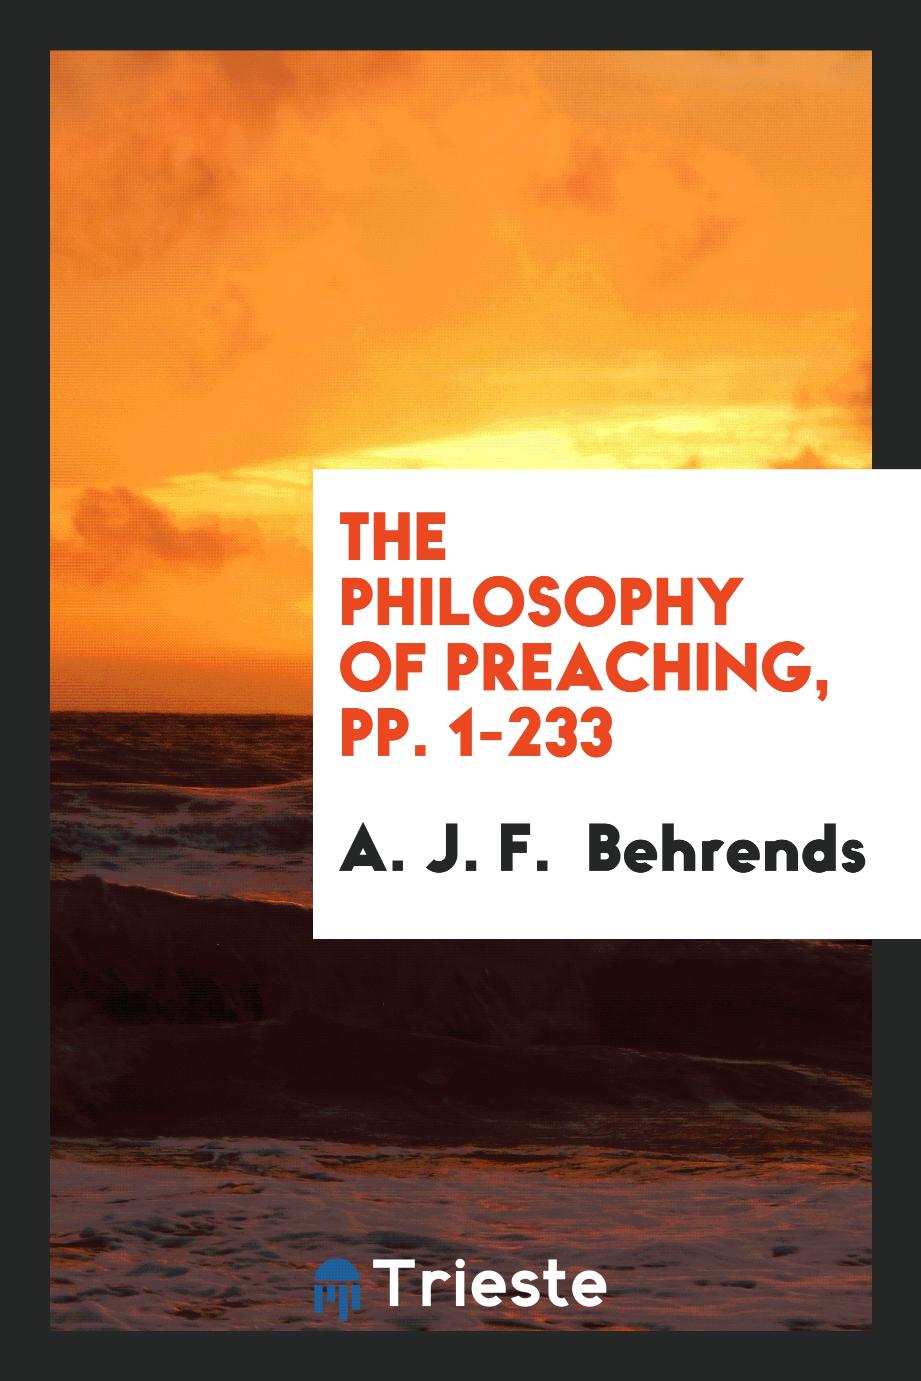 The Philosophy of Preaching, pp. 1-233